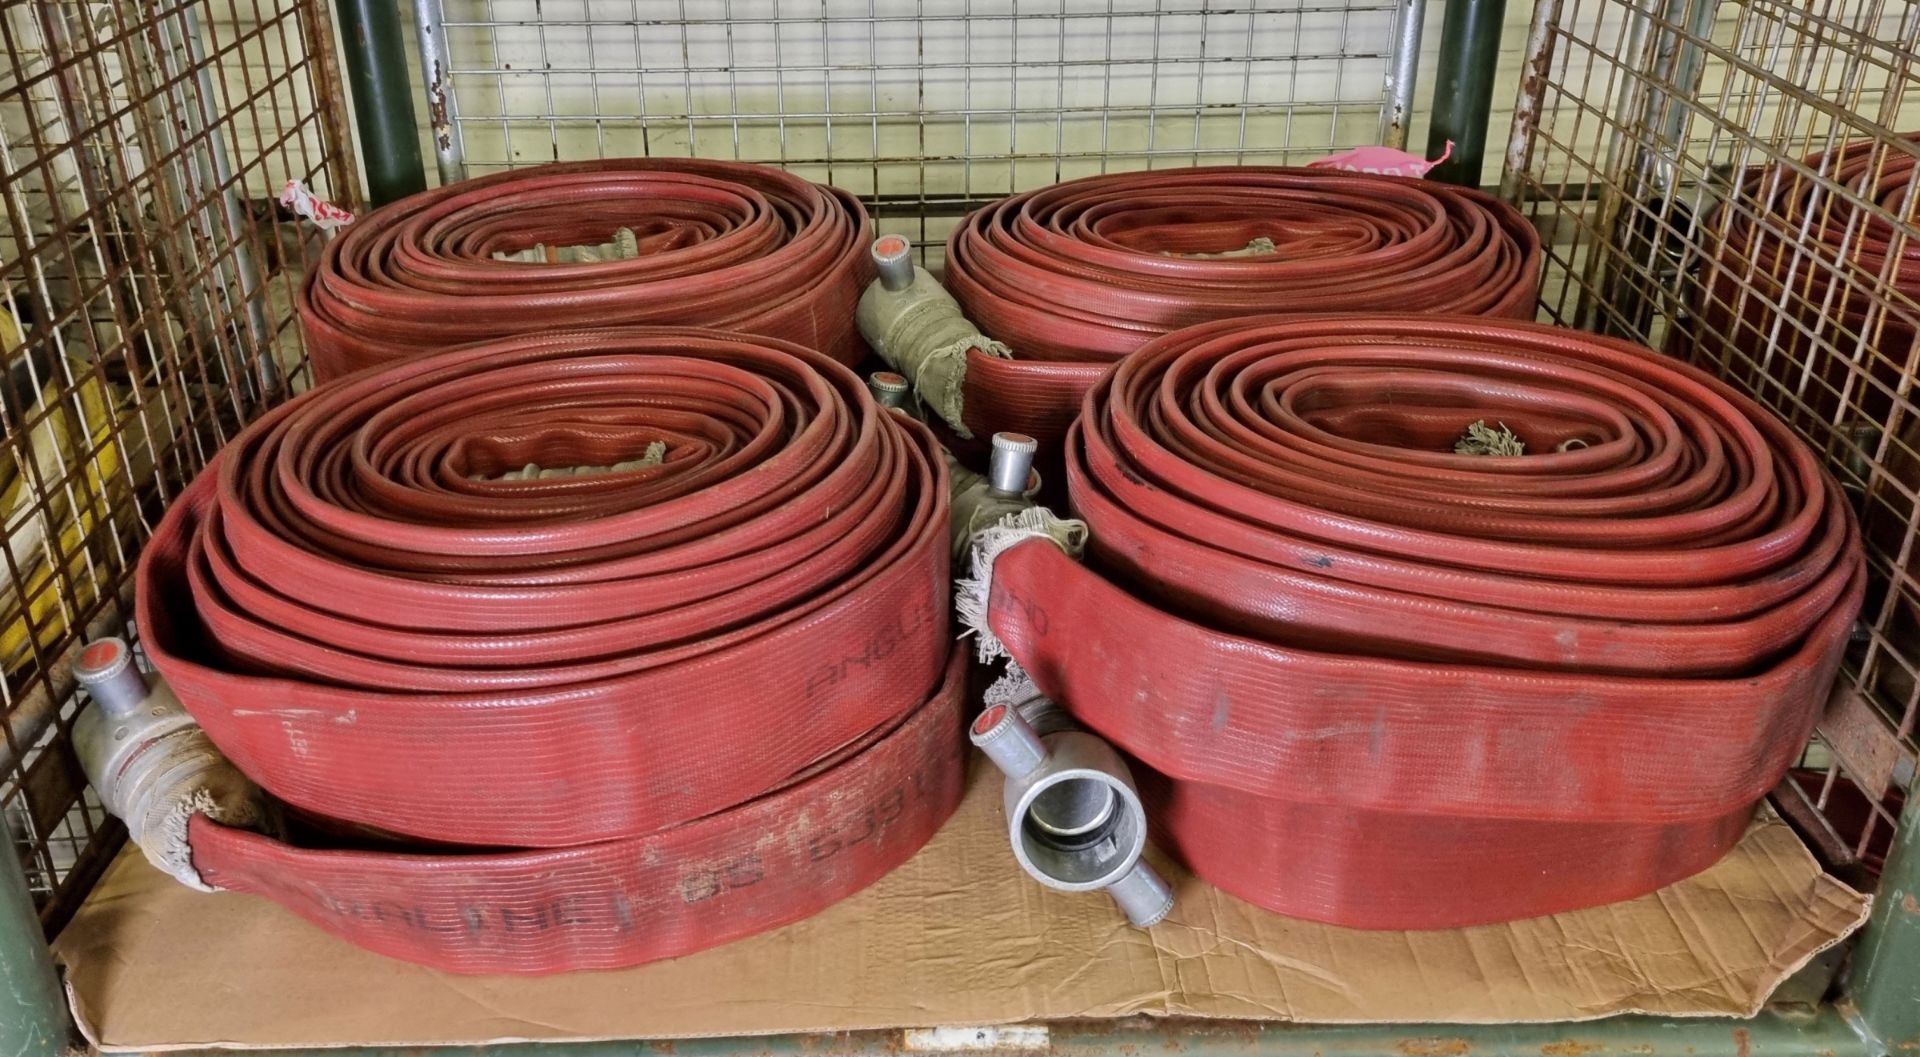 8x Angus Duraline 70mm lay flat hoses with couplings - approx 23 M in length - Bild 2 aus 5